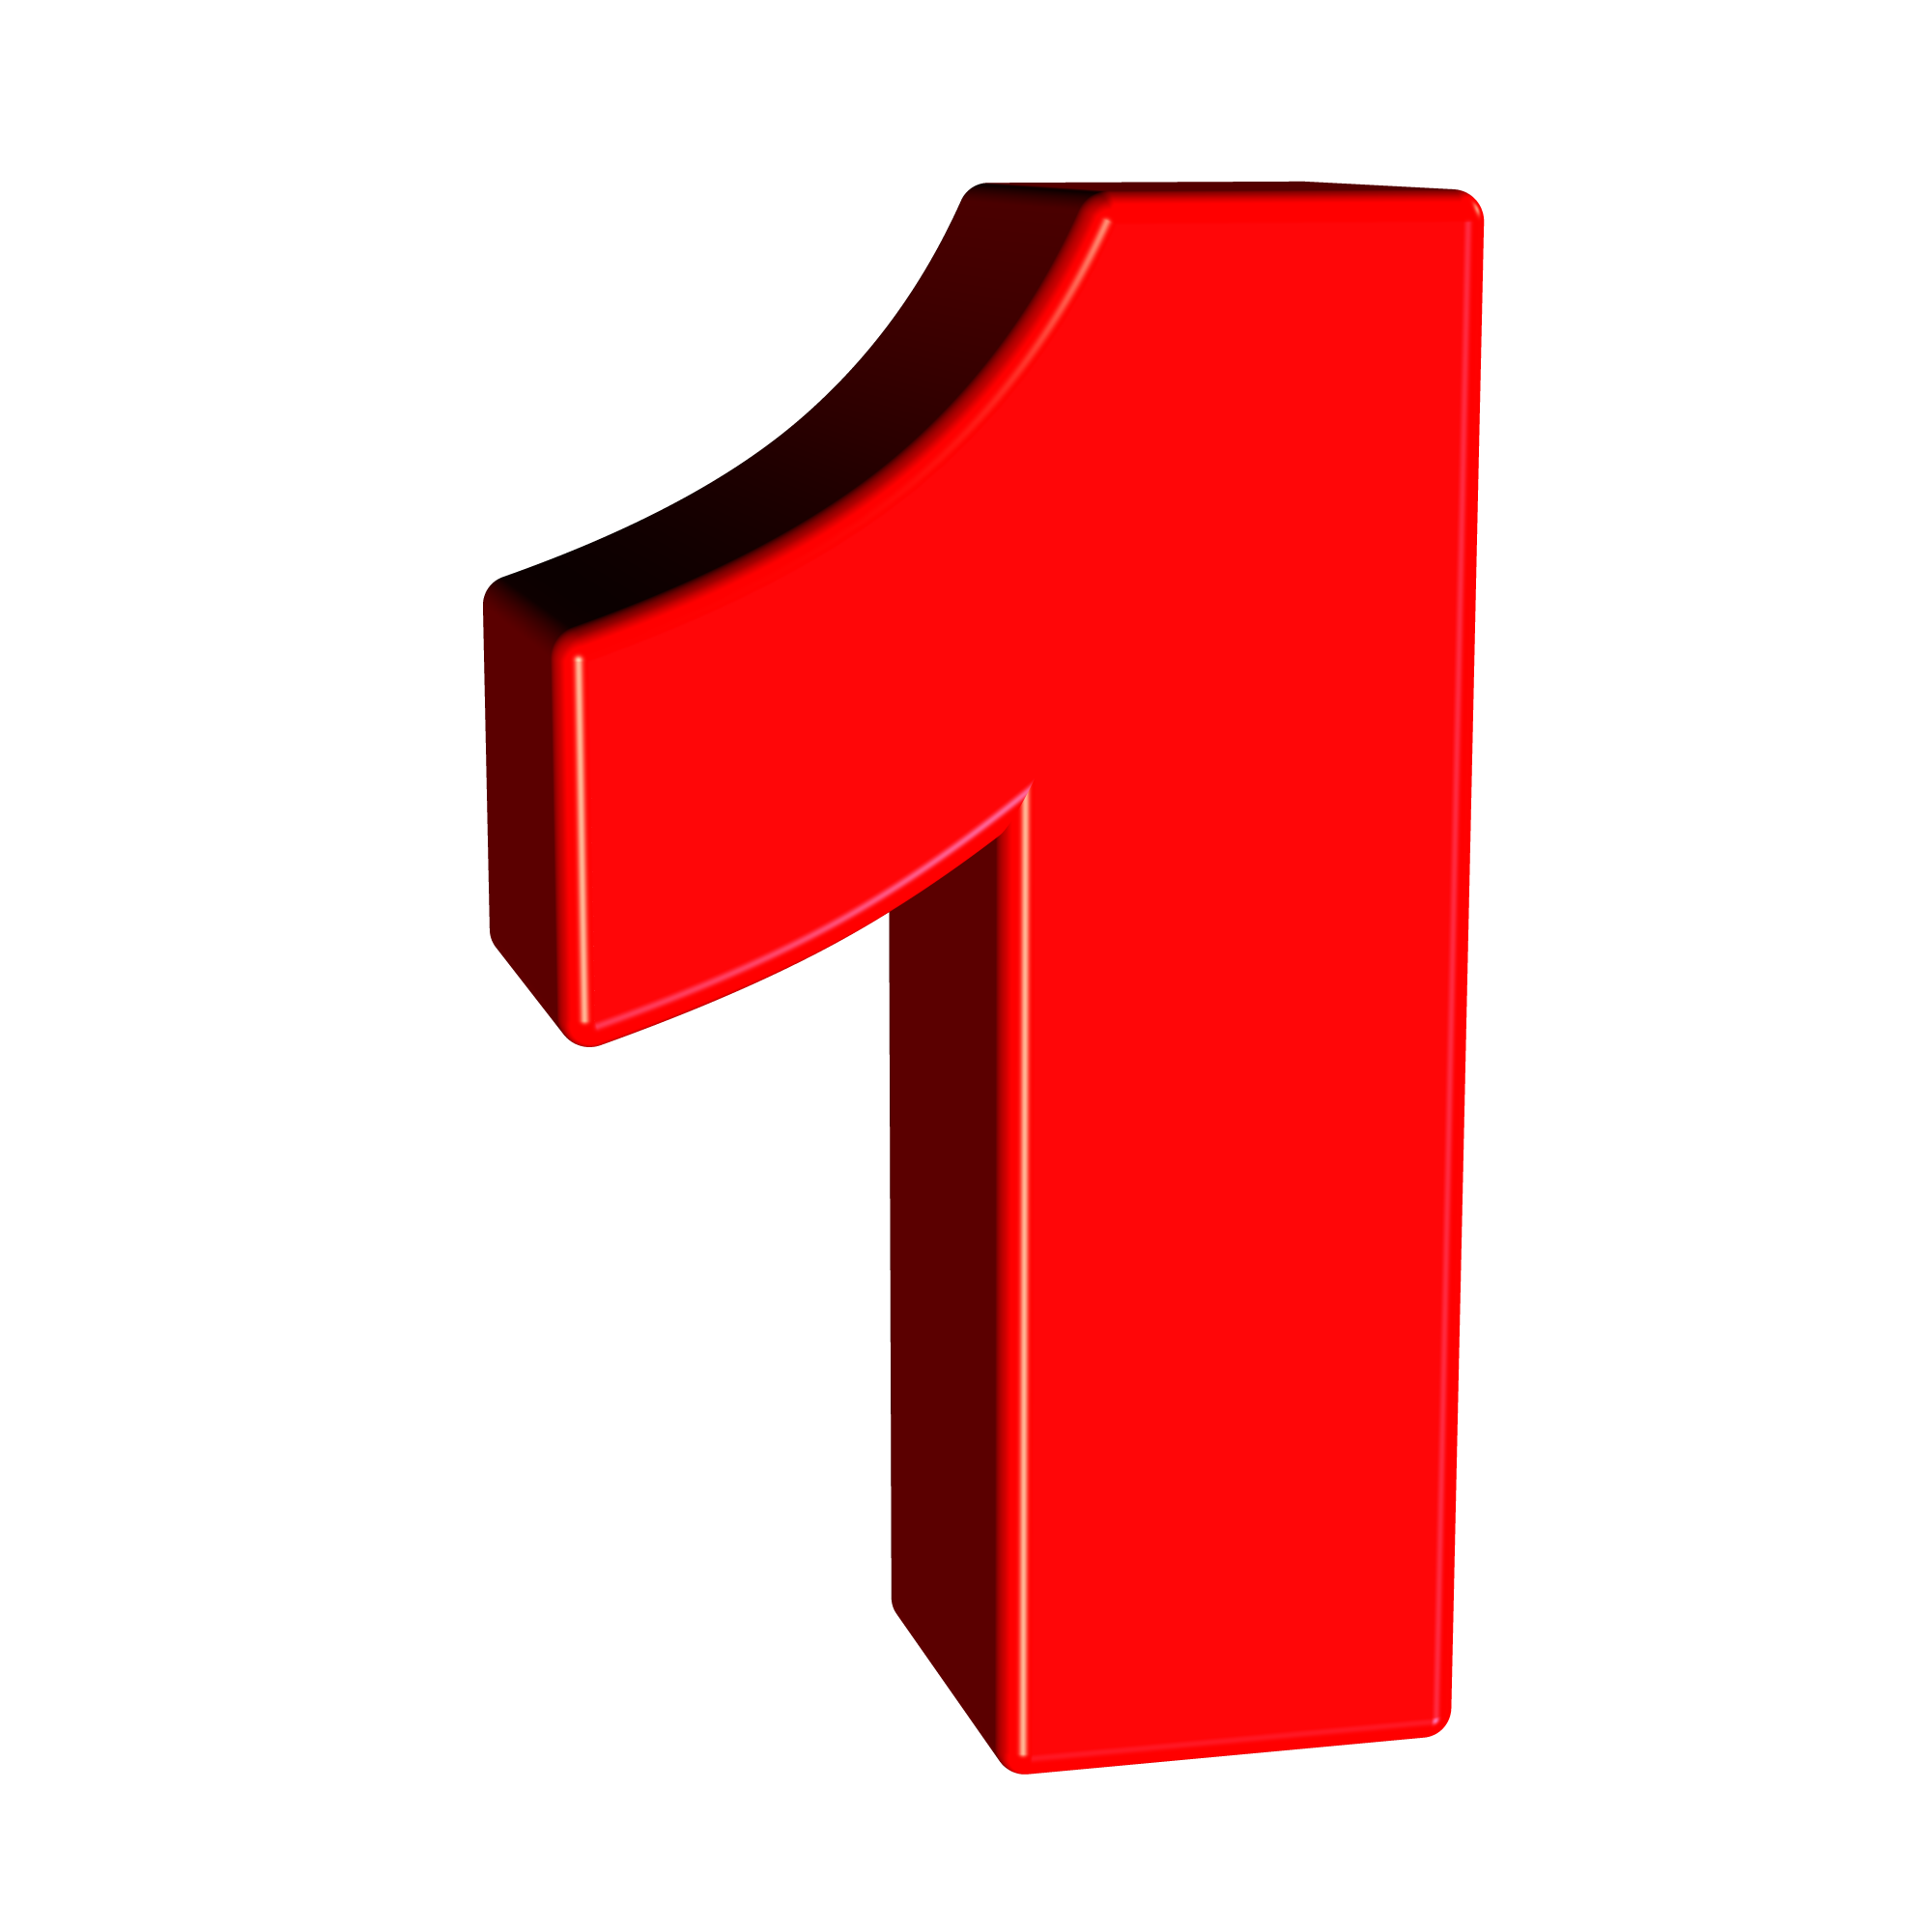 Red, Rounded,with Number 1 Clip Art At Clker - Number 1 Inside Red ...